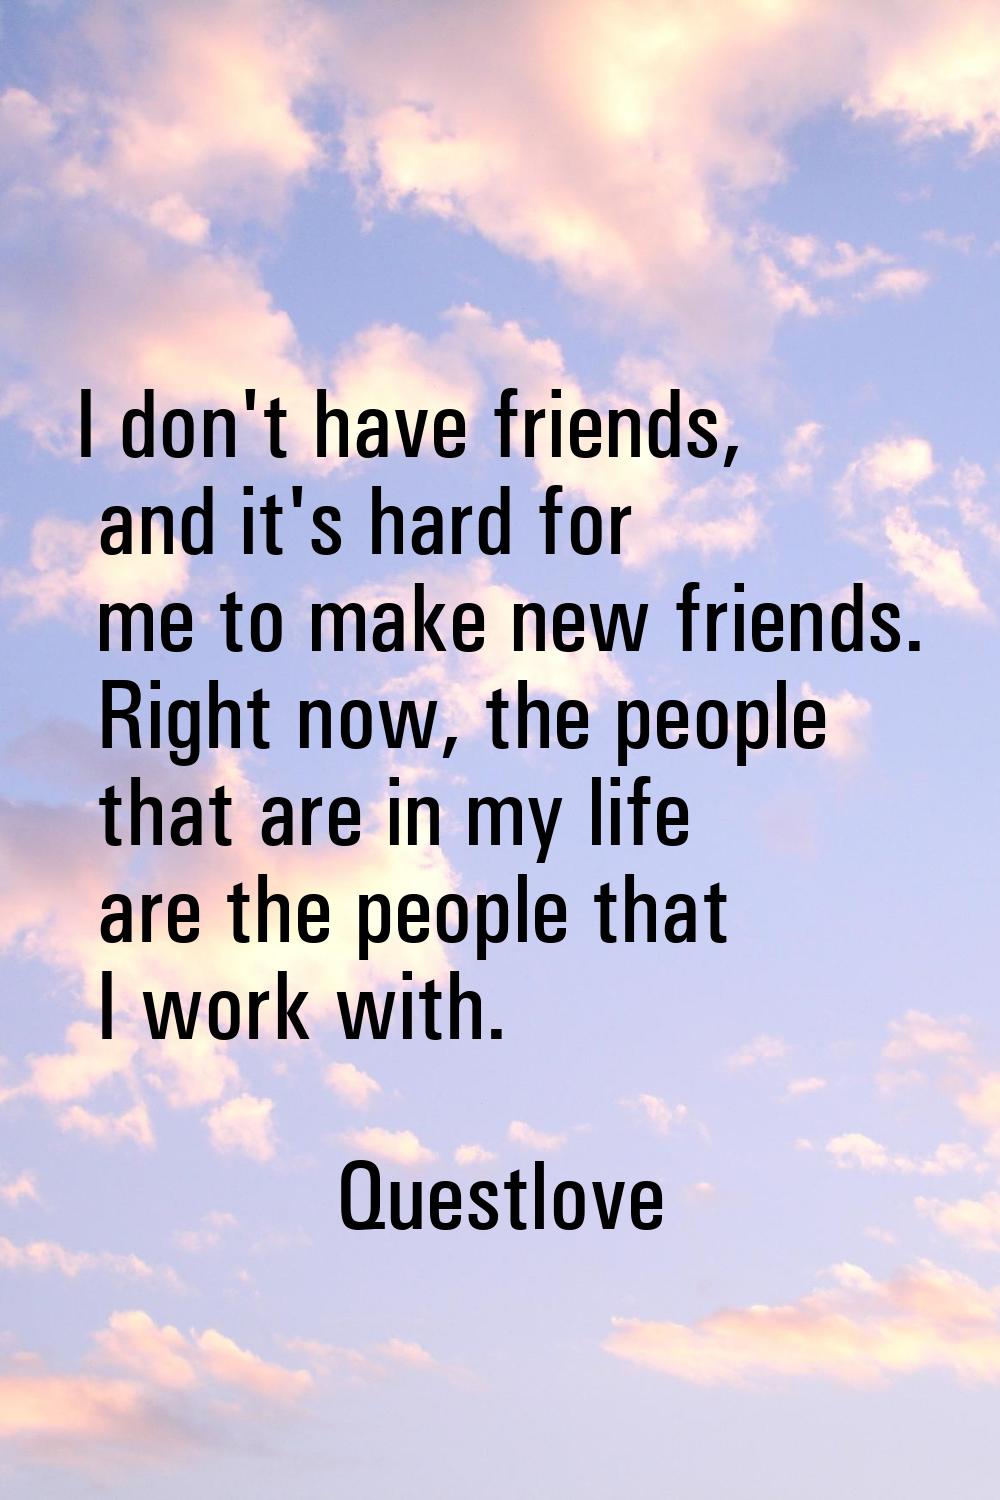 I don't have friends, and it's hard for me to make new friends. Right now, the people that are in m